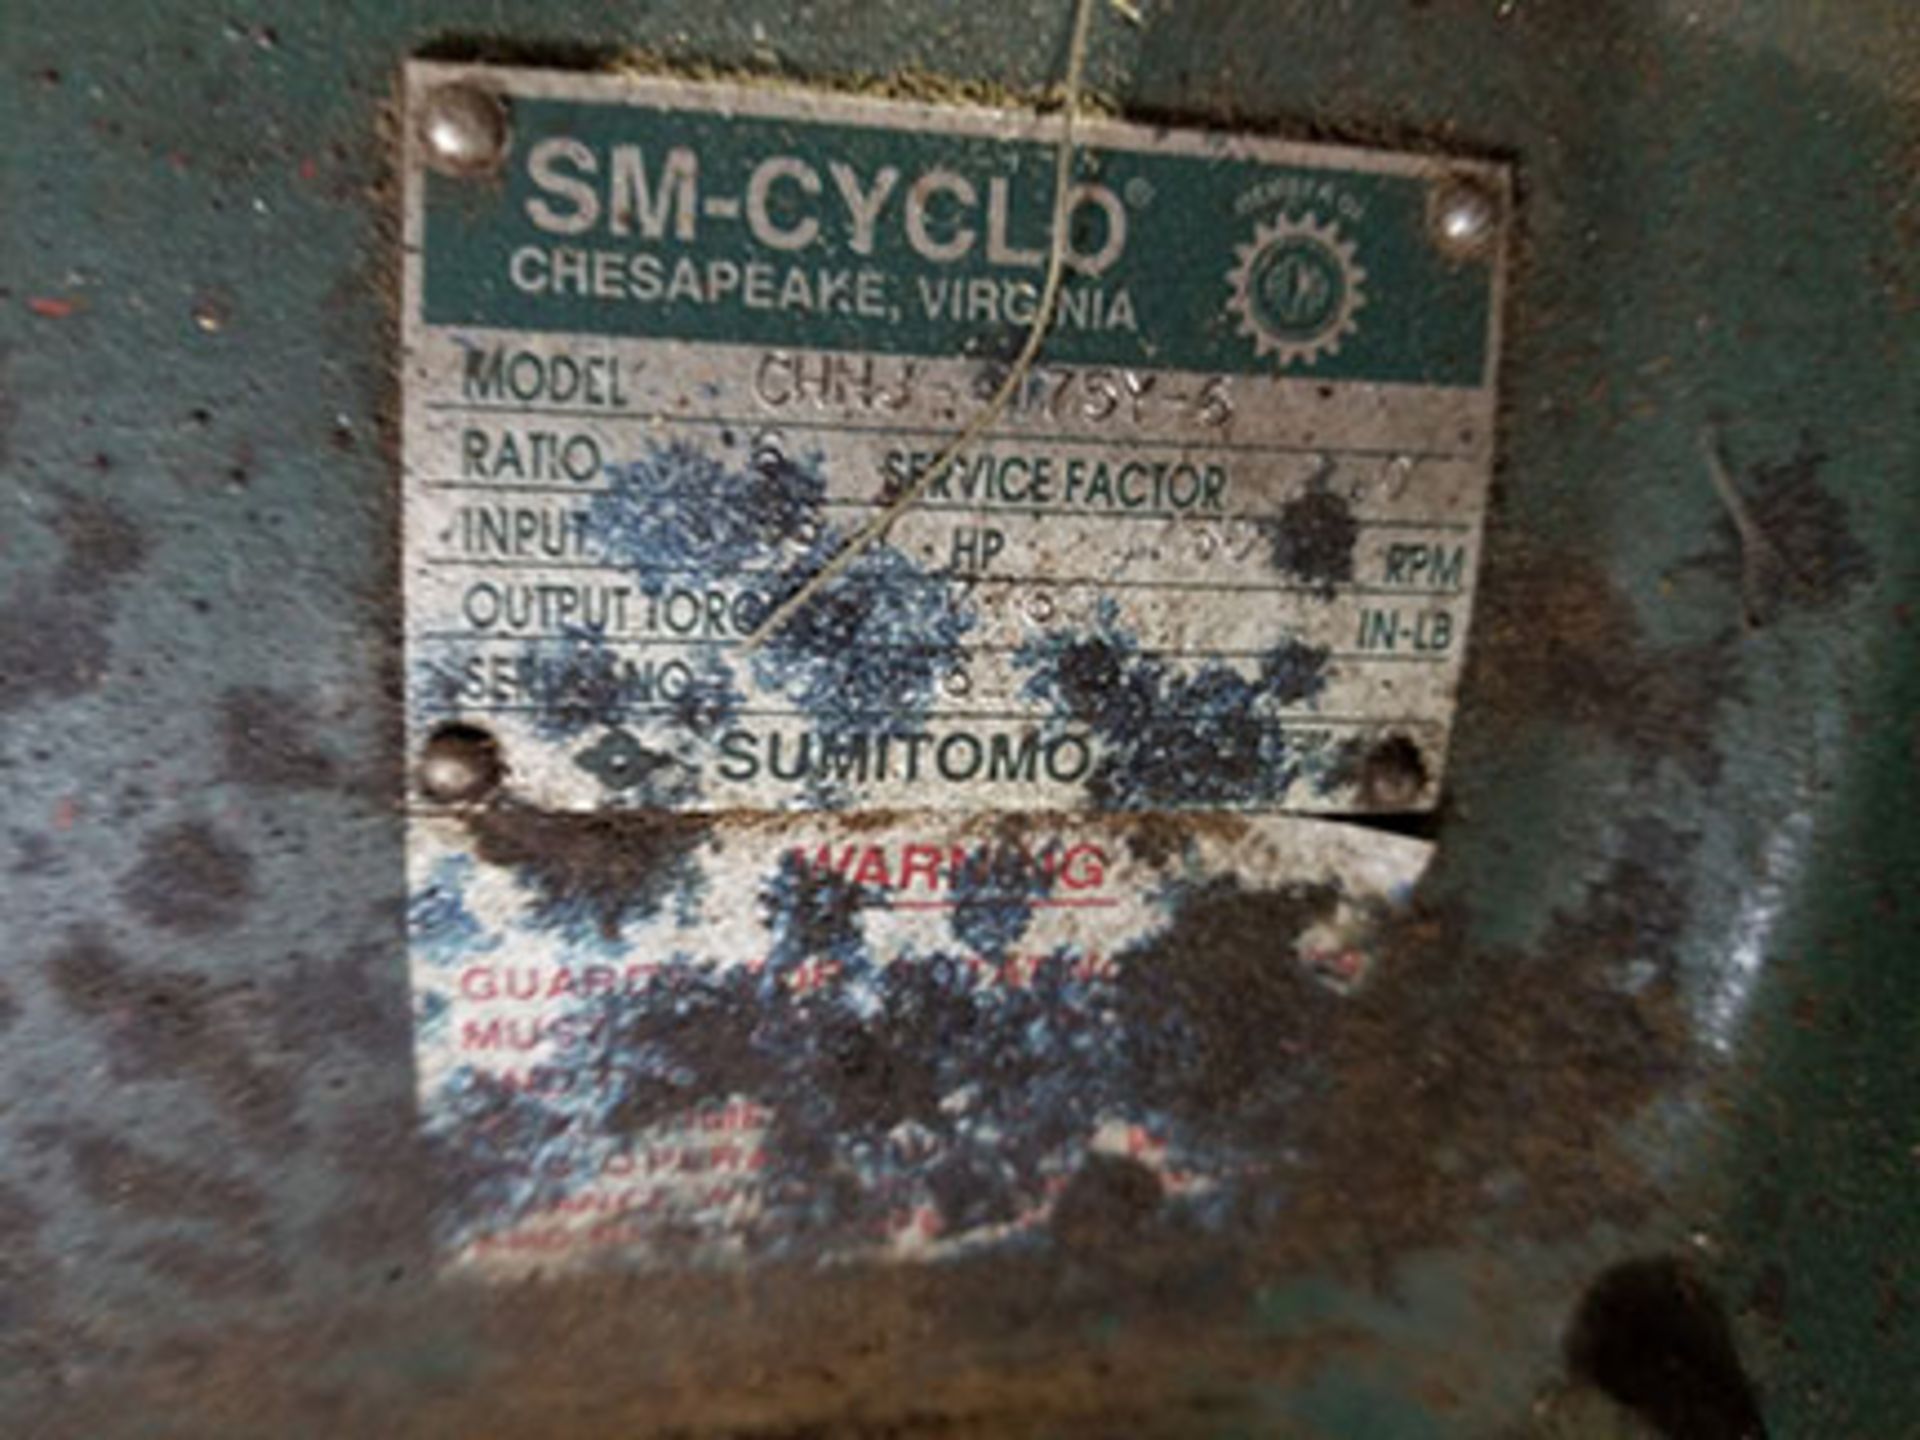 PALLET OF (5) GEAR BOXES / GEAR REDUCER ( SOME WITH SPROCKET GEARS )-  SM-CYCLO, 6 RATIO, 1,750 - Image 4 of 14